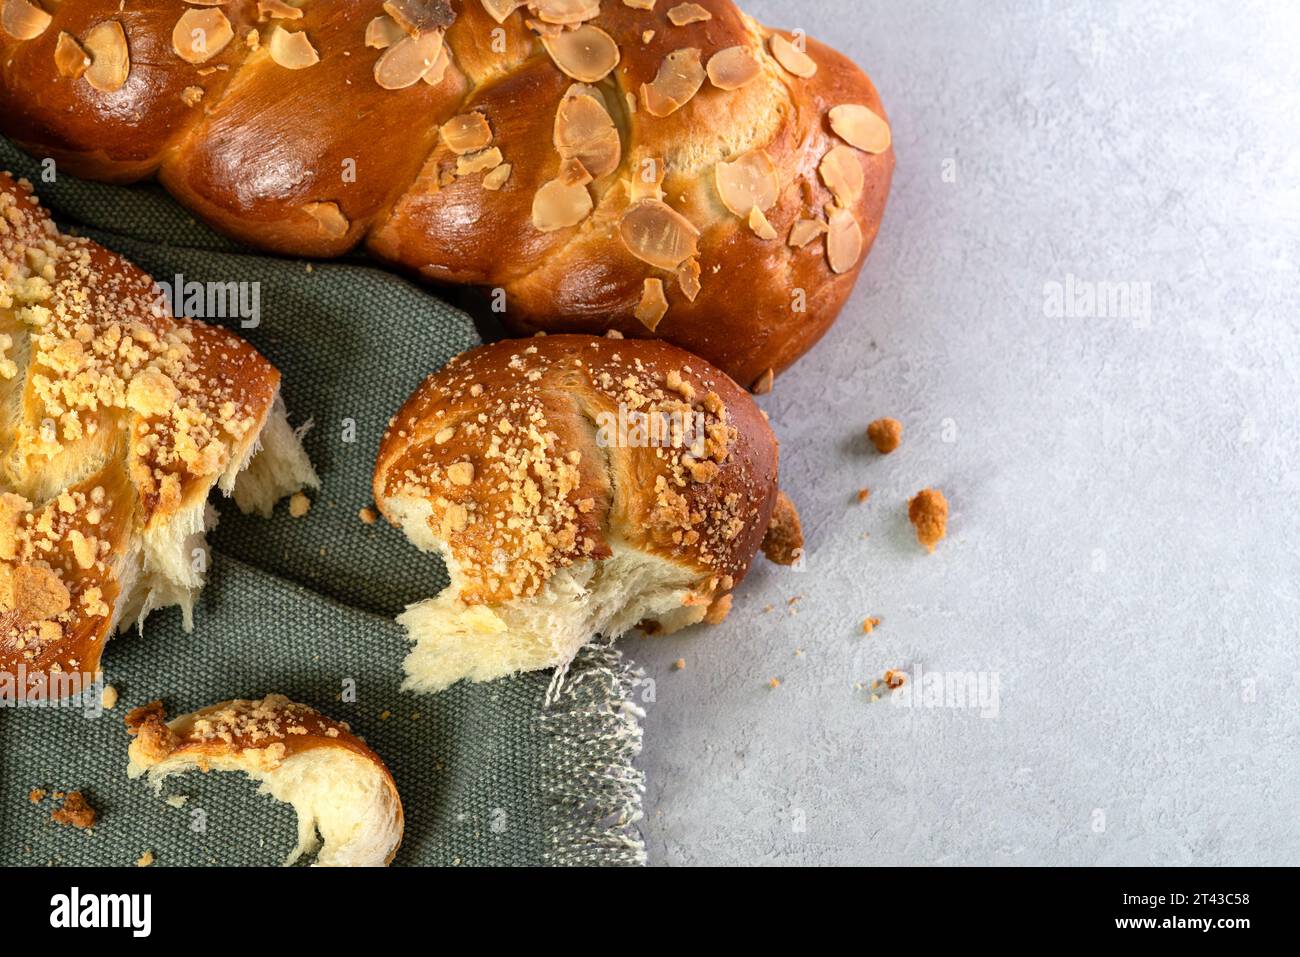 https://c8.alamy.com/comp/2T43C58/a-challah-bread-also-known-as-a-polish-chalka-is-shown-on-a-marble-table-it-is-topped-with-sweet-crumbs-and-resting-on-a-cloth-2T43C58.jpg